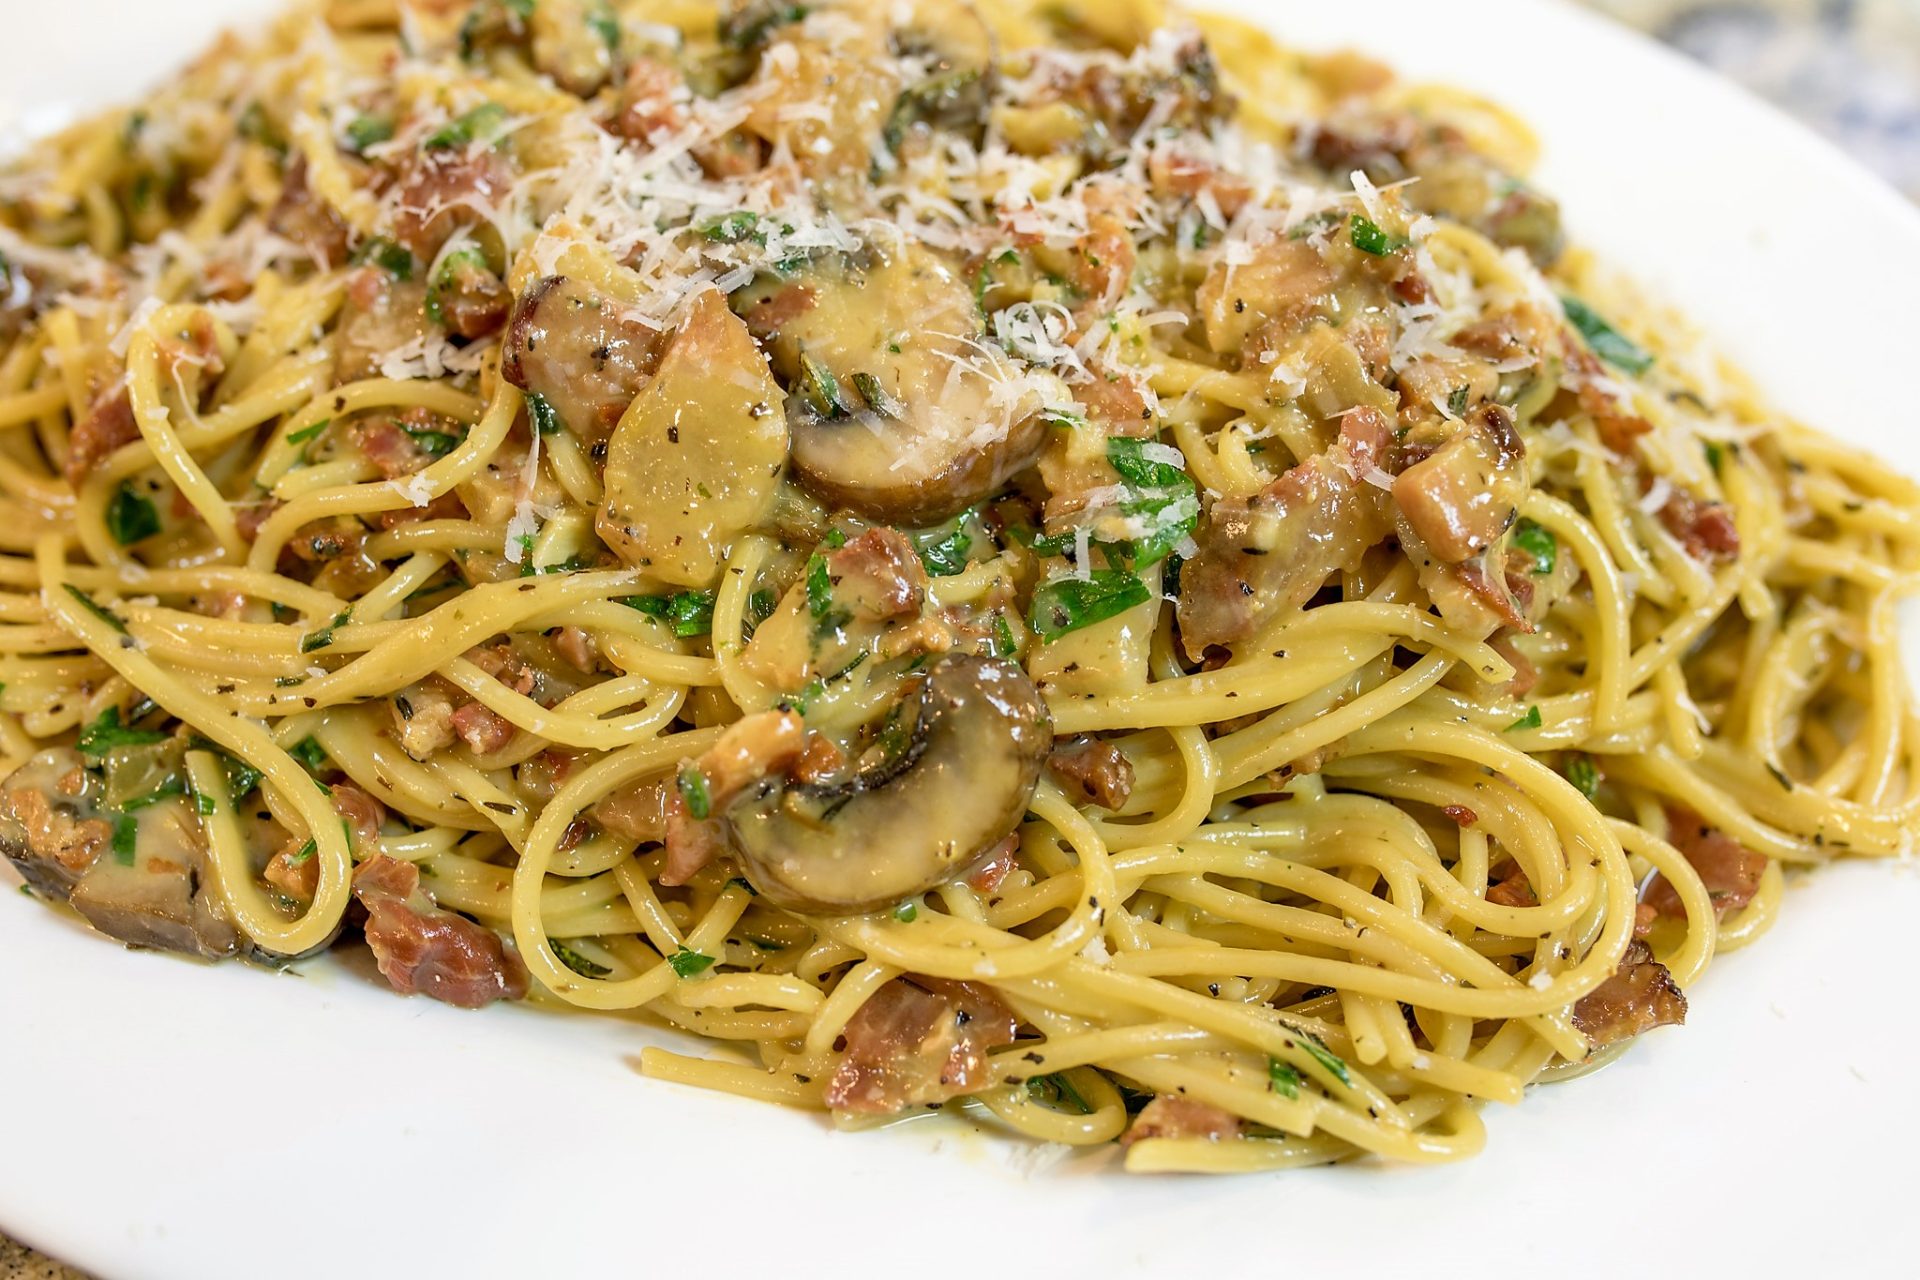 A plate of pasta with mushrooms and meat.